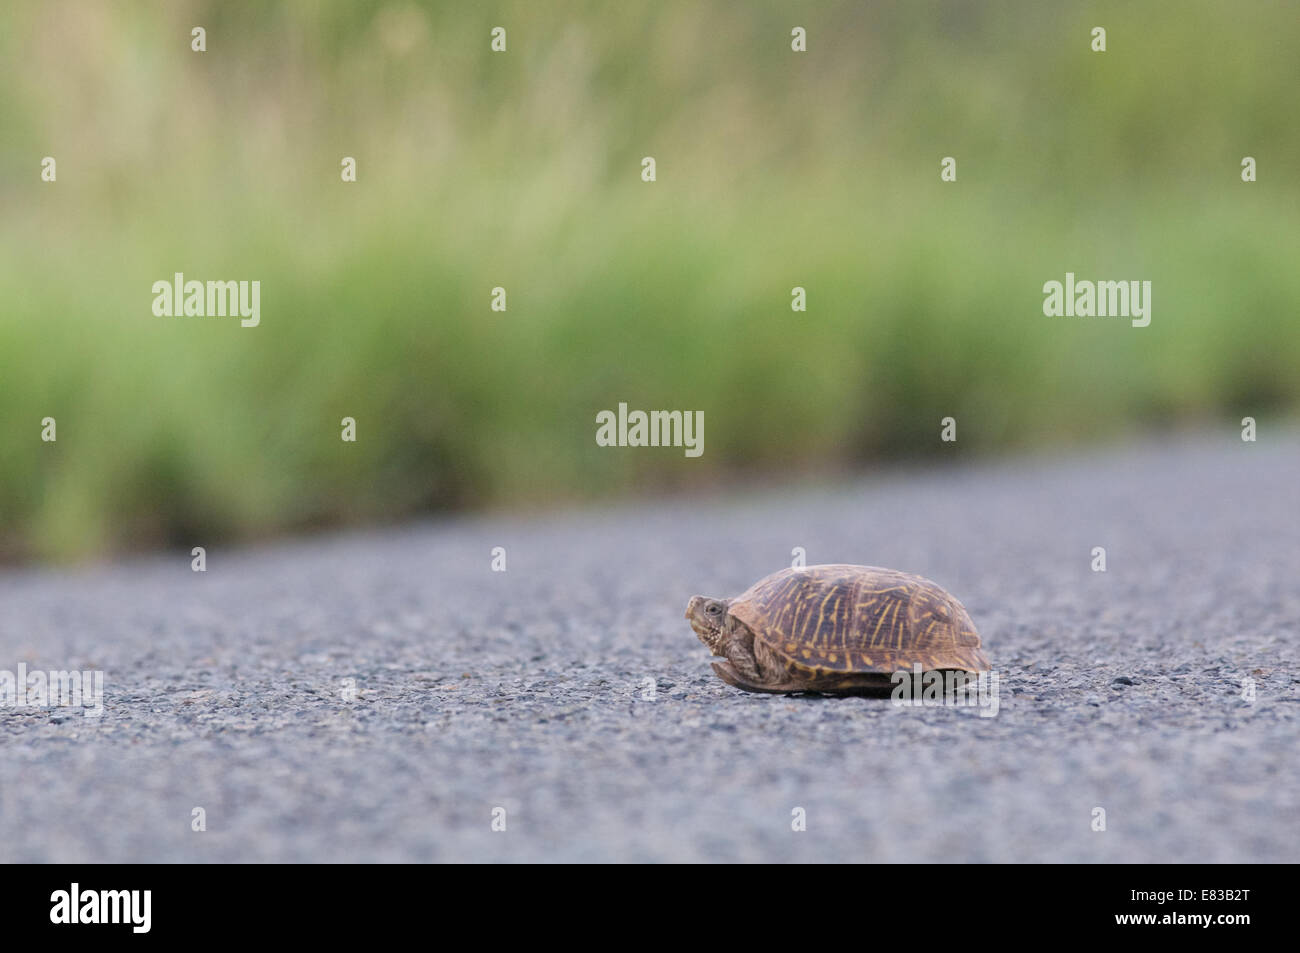 A Desert Box Turtle (Terrapene ornata luteola) paused in the middle of a paved road in Hidalgo County, New Mexico Stock Photo